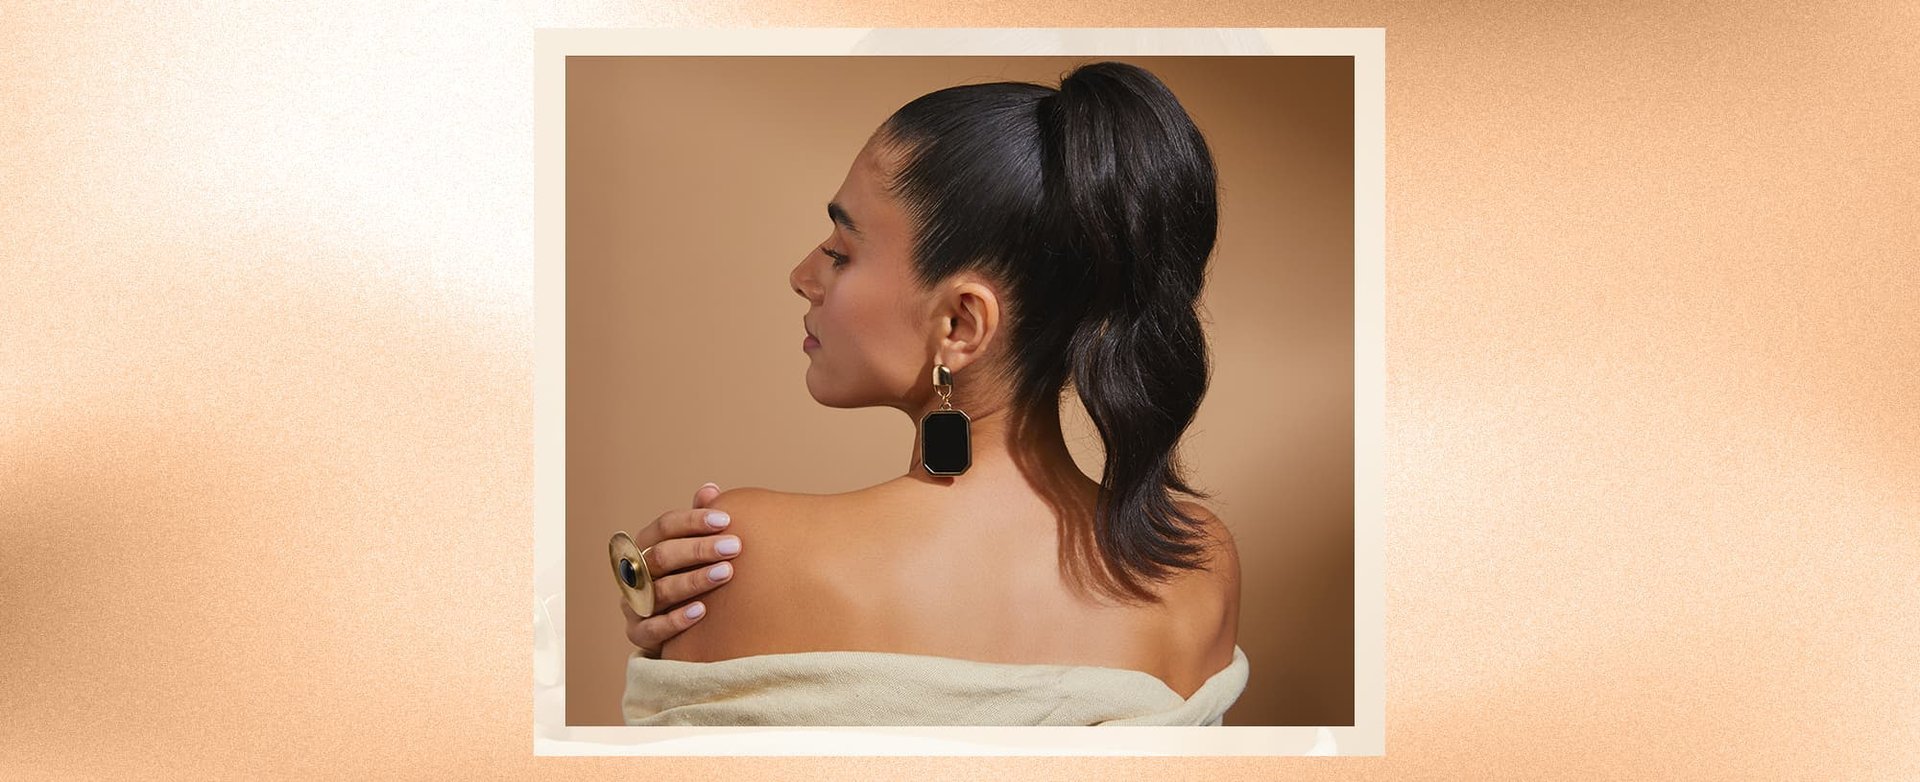 5 Easy At-Home Prom Hairstyles To Slay Your Look With This Year